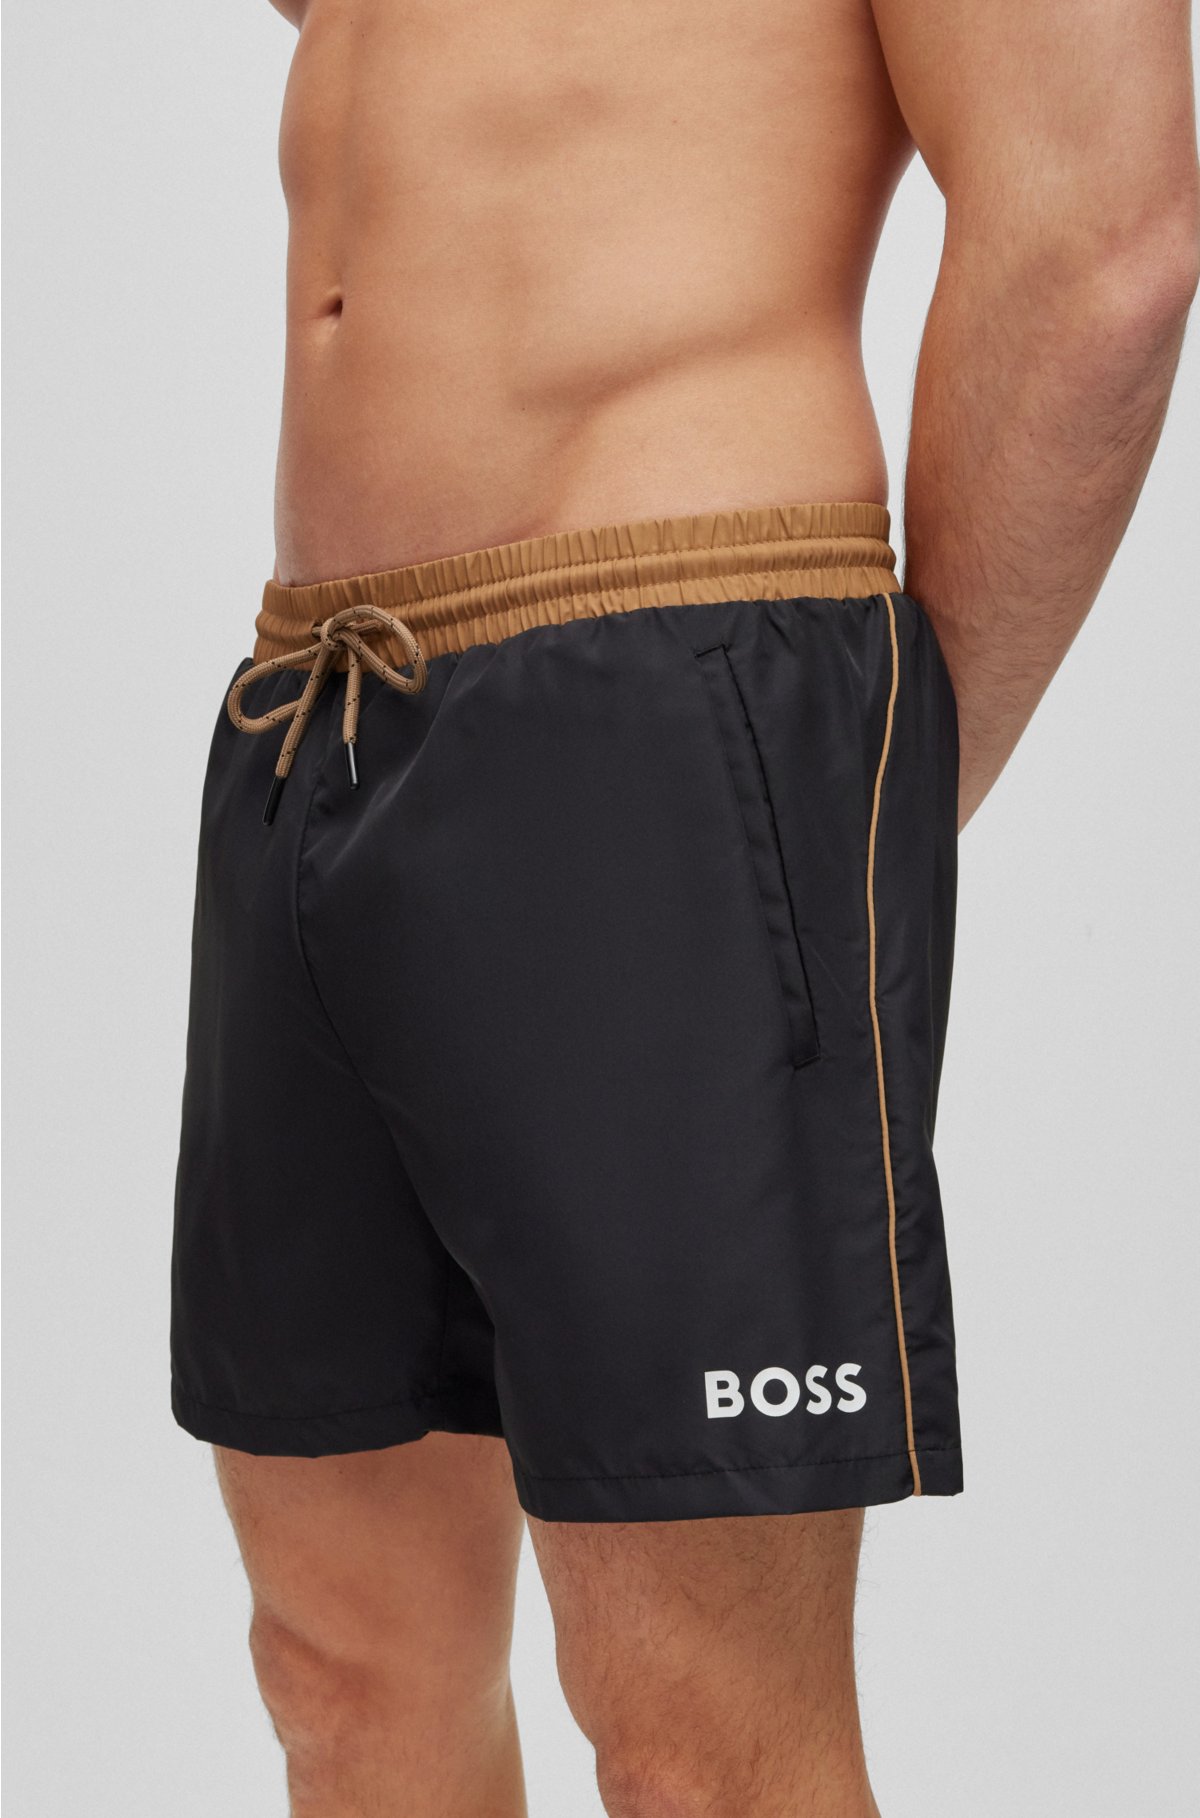 BOSS - Contrast-logo shorts recycled material